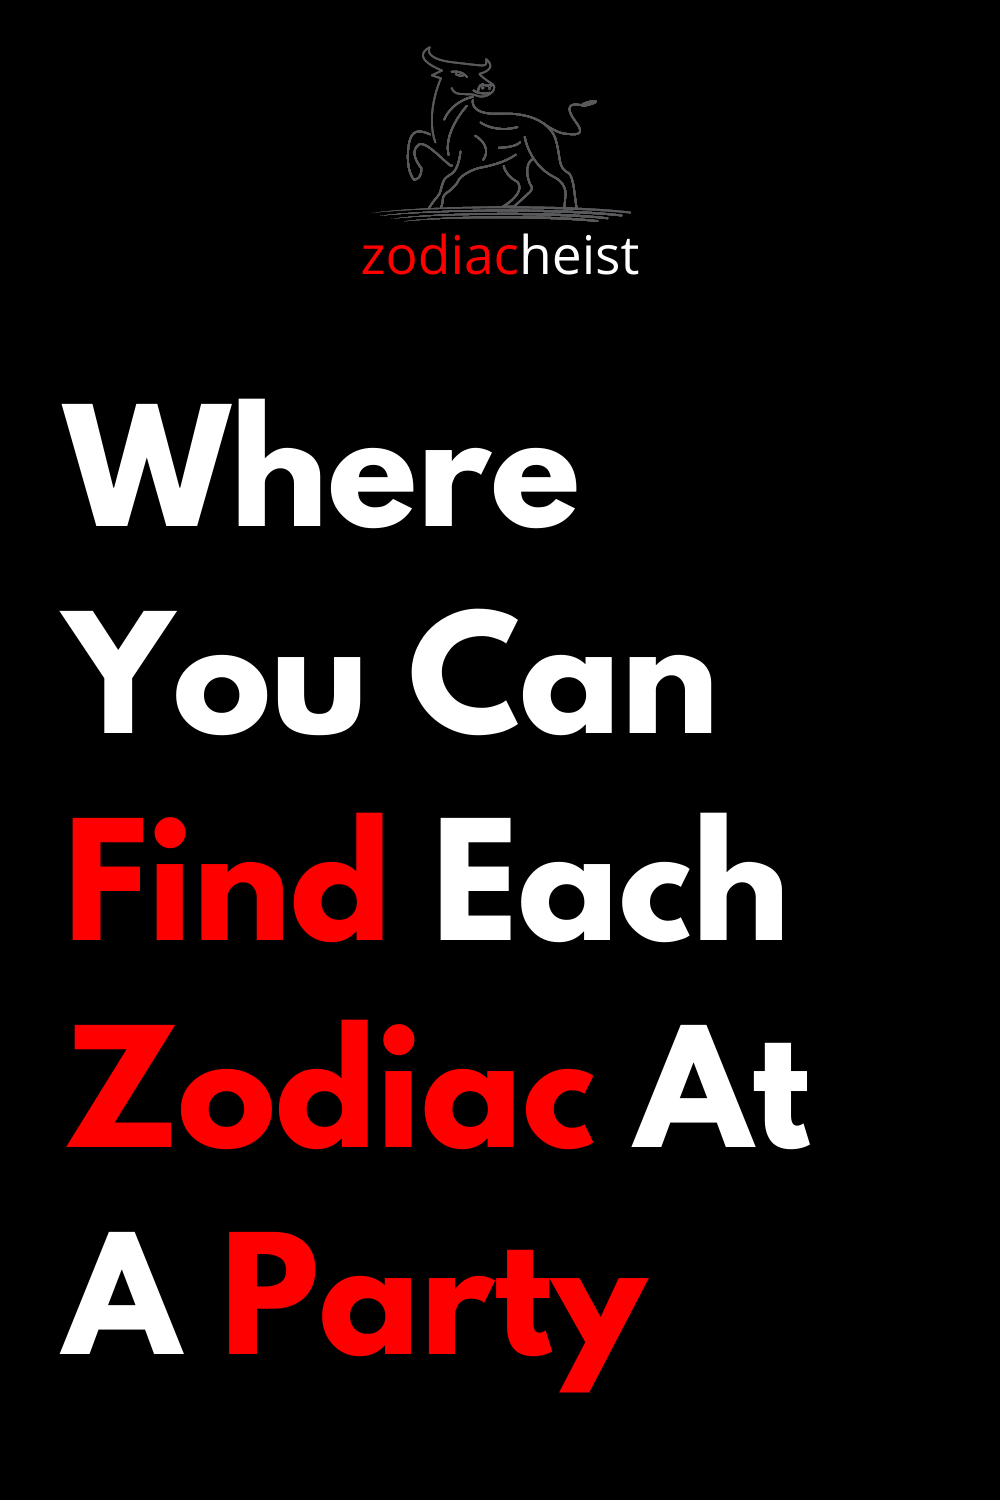 Where You Can Find Each Zodiac At A Party